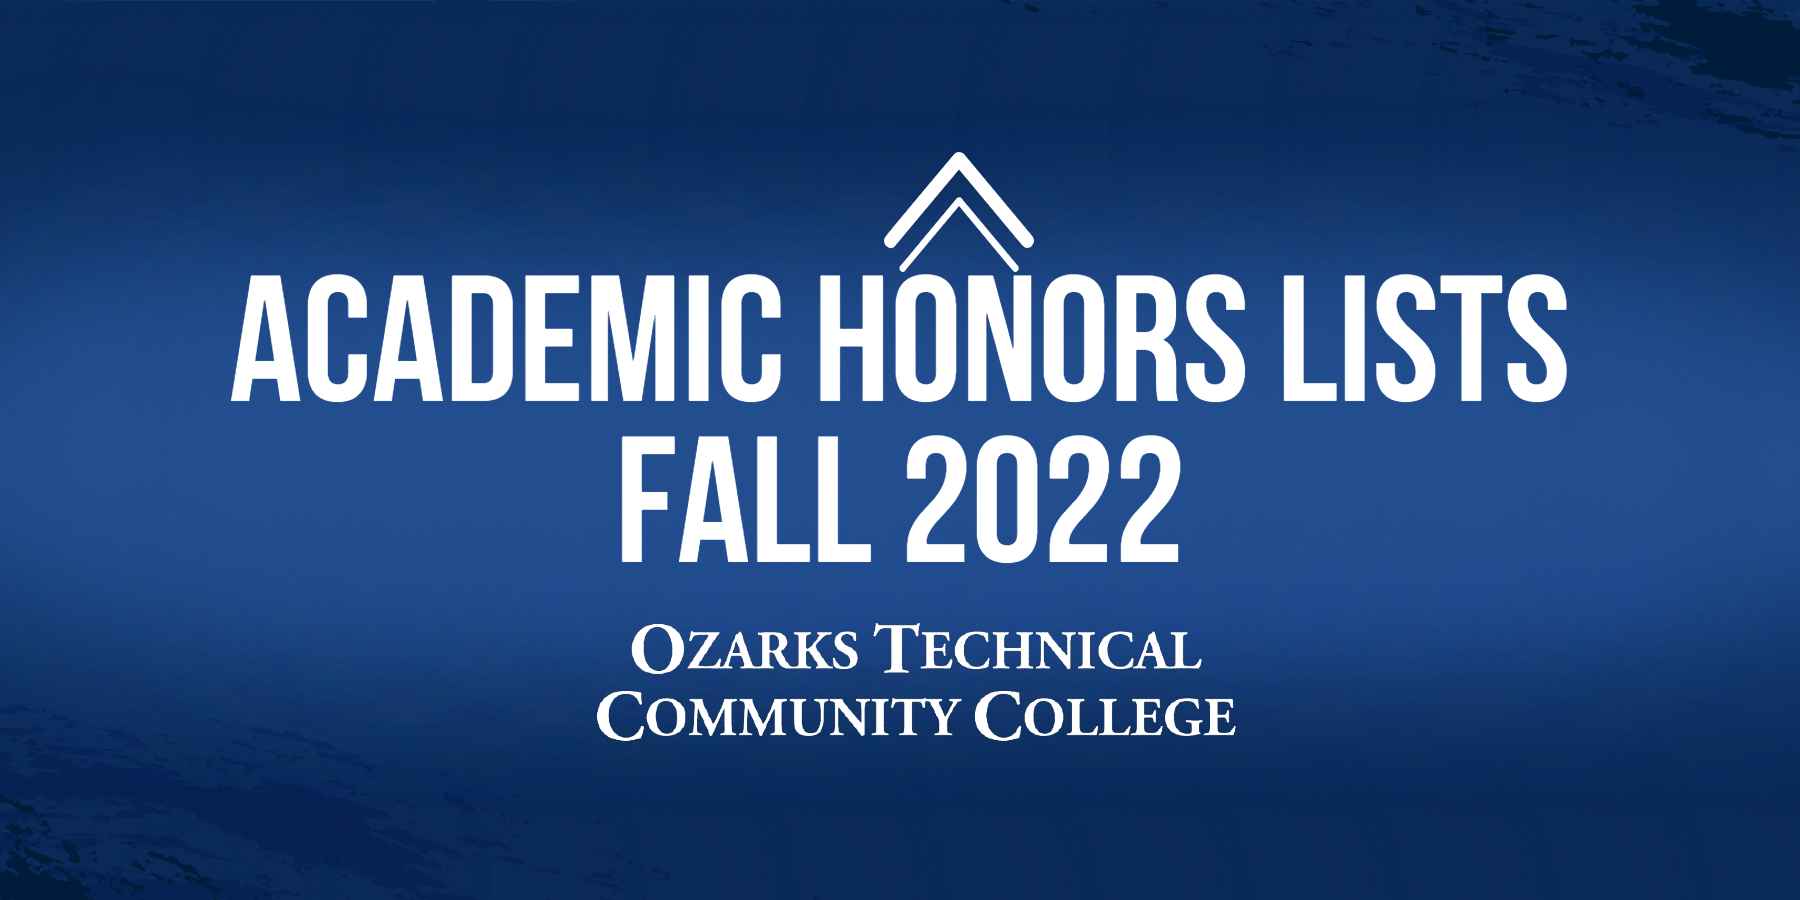 Chancellor's, Dean's and Provost's Lists for Fall 2022